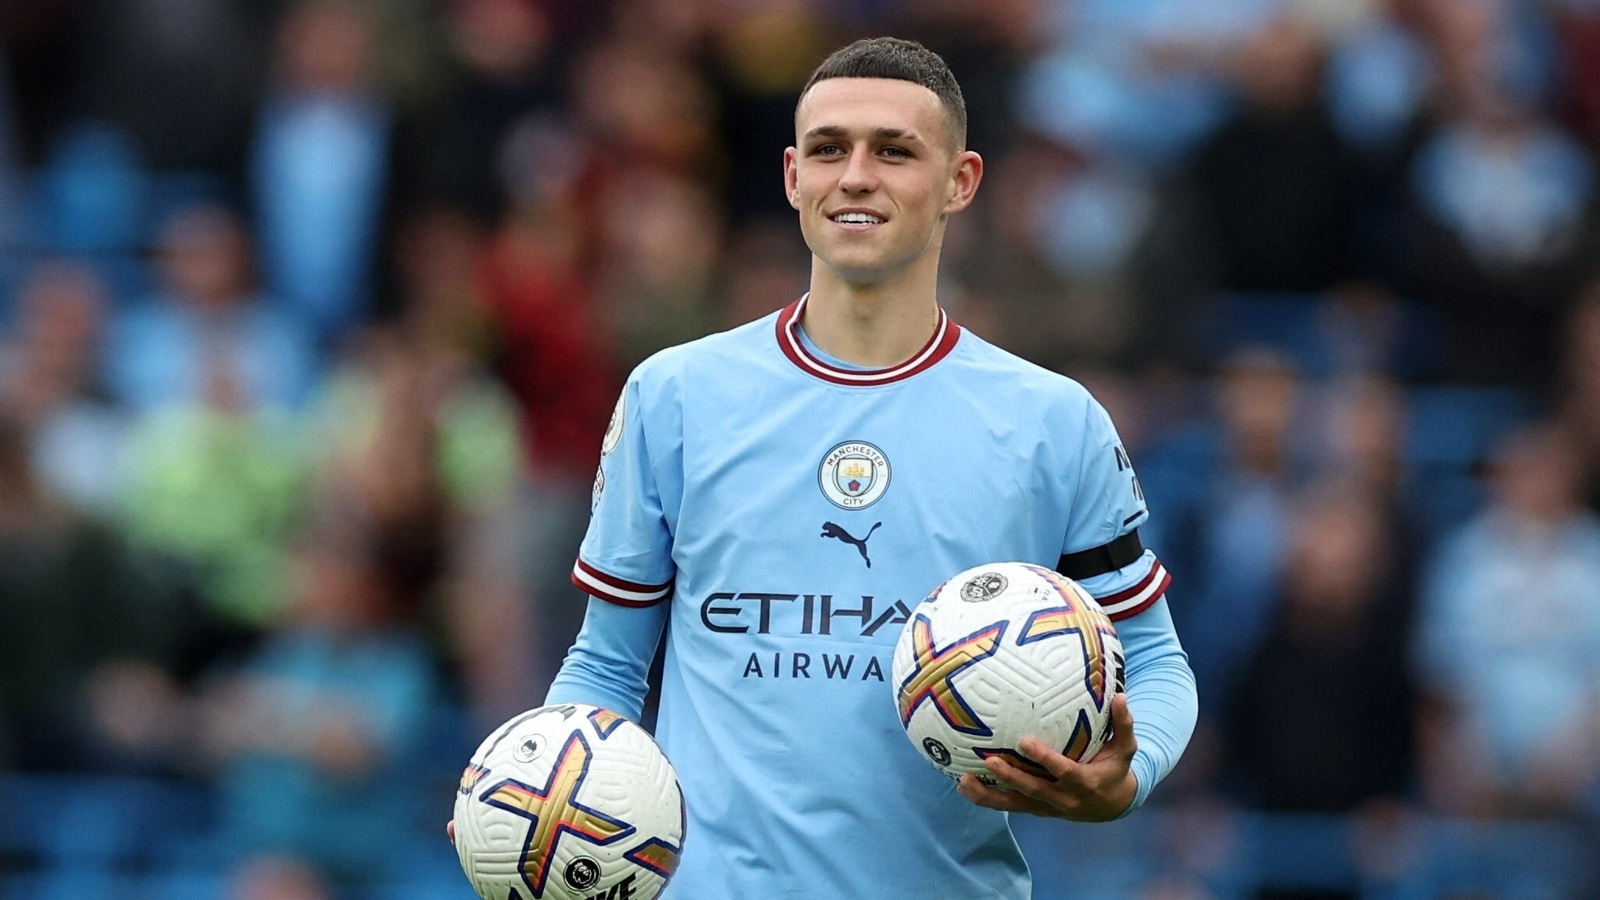 guardiola-wants-exceptional-phil-foden-to-stay-at-city-for-many-years